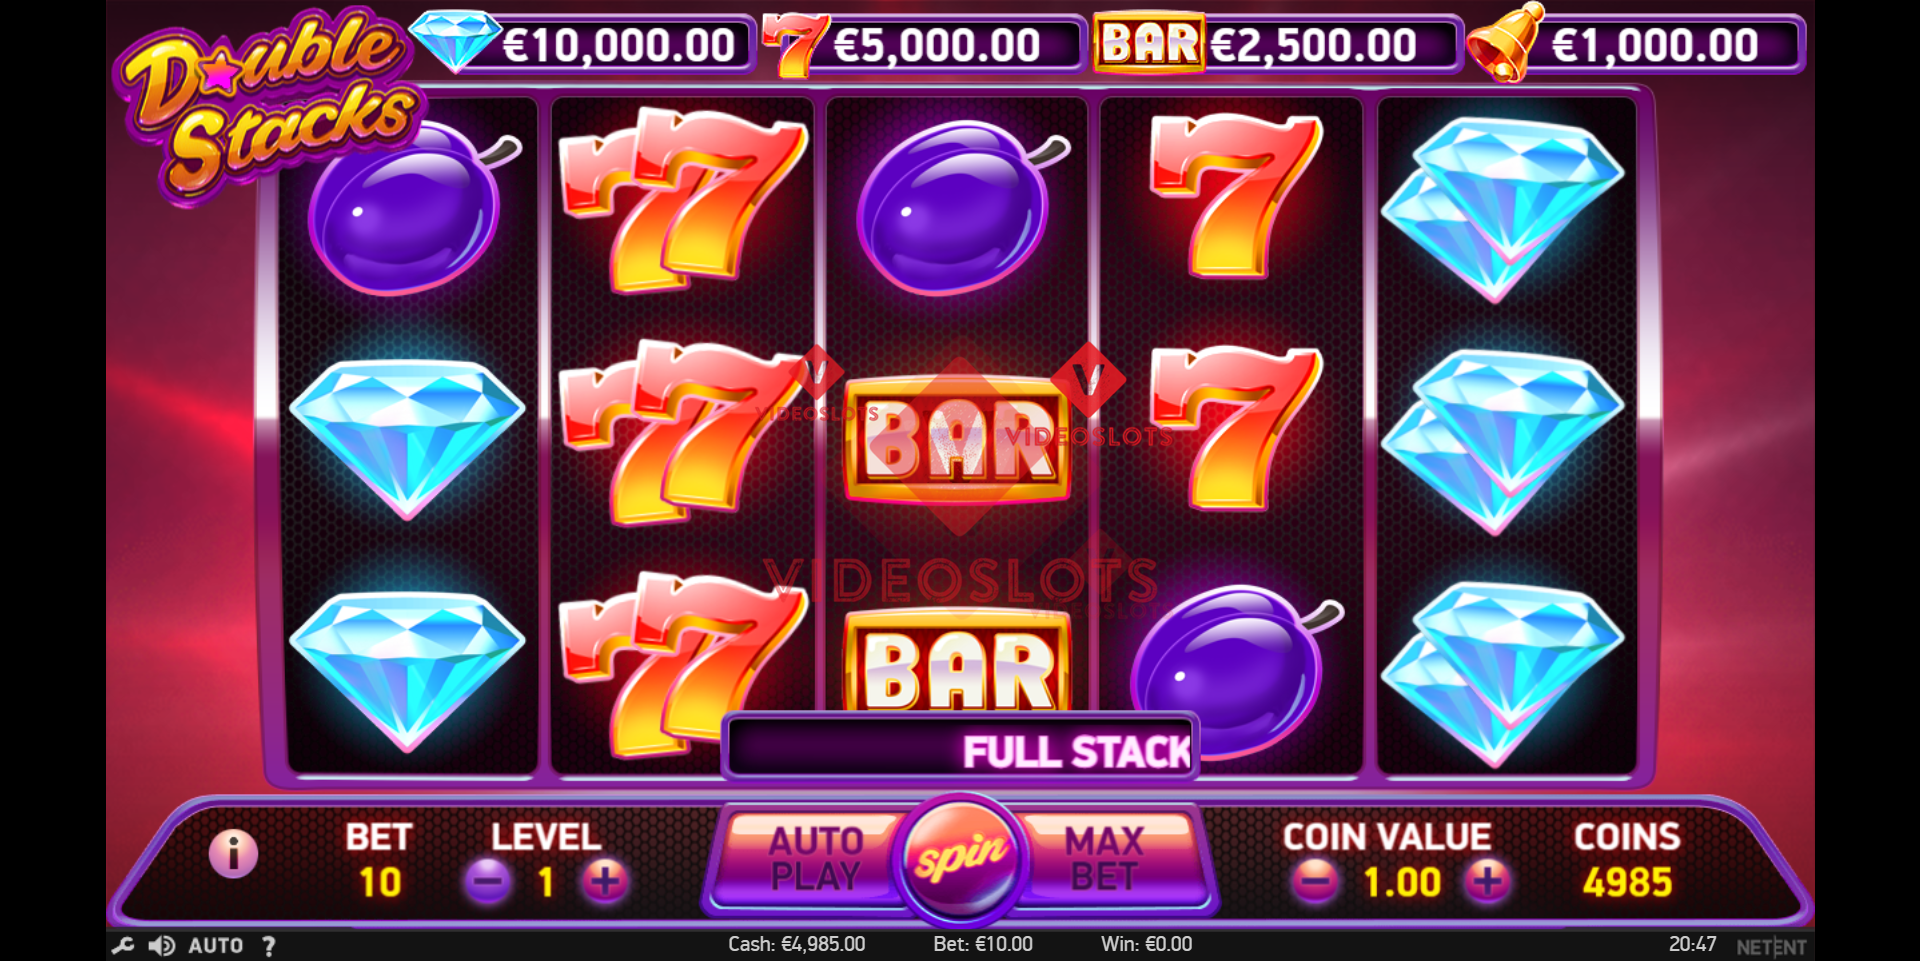 Base Game for Double Stacks slot from NetEnt